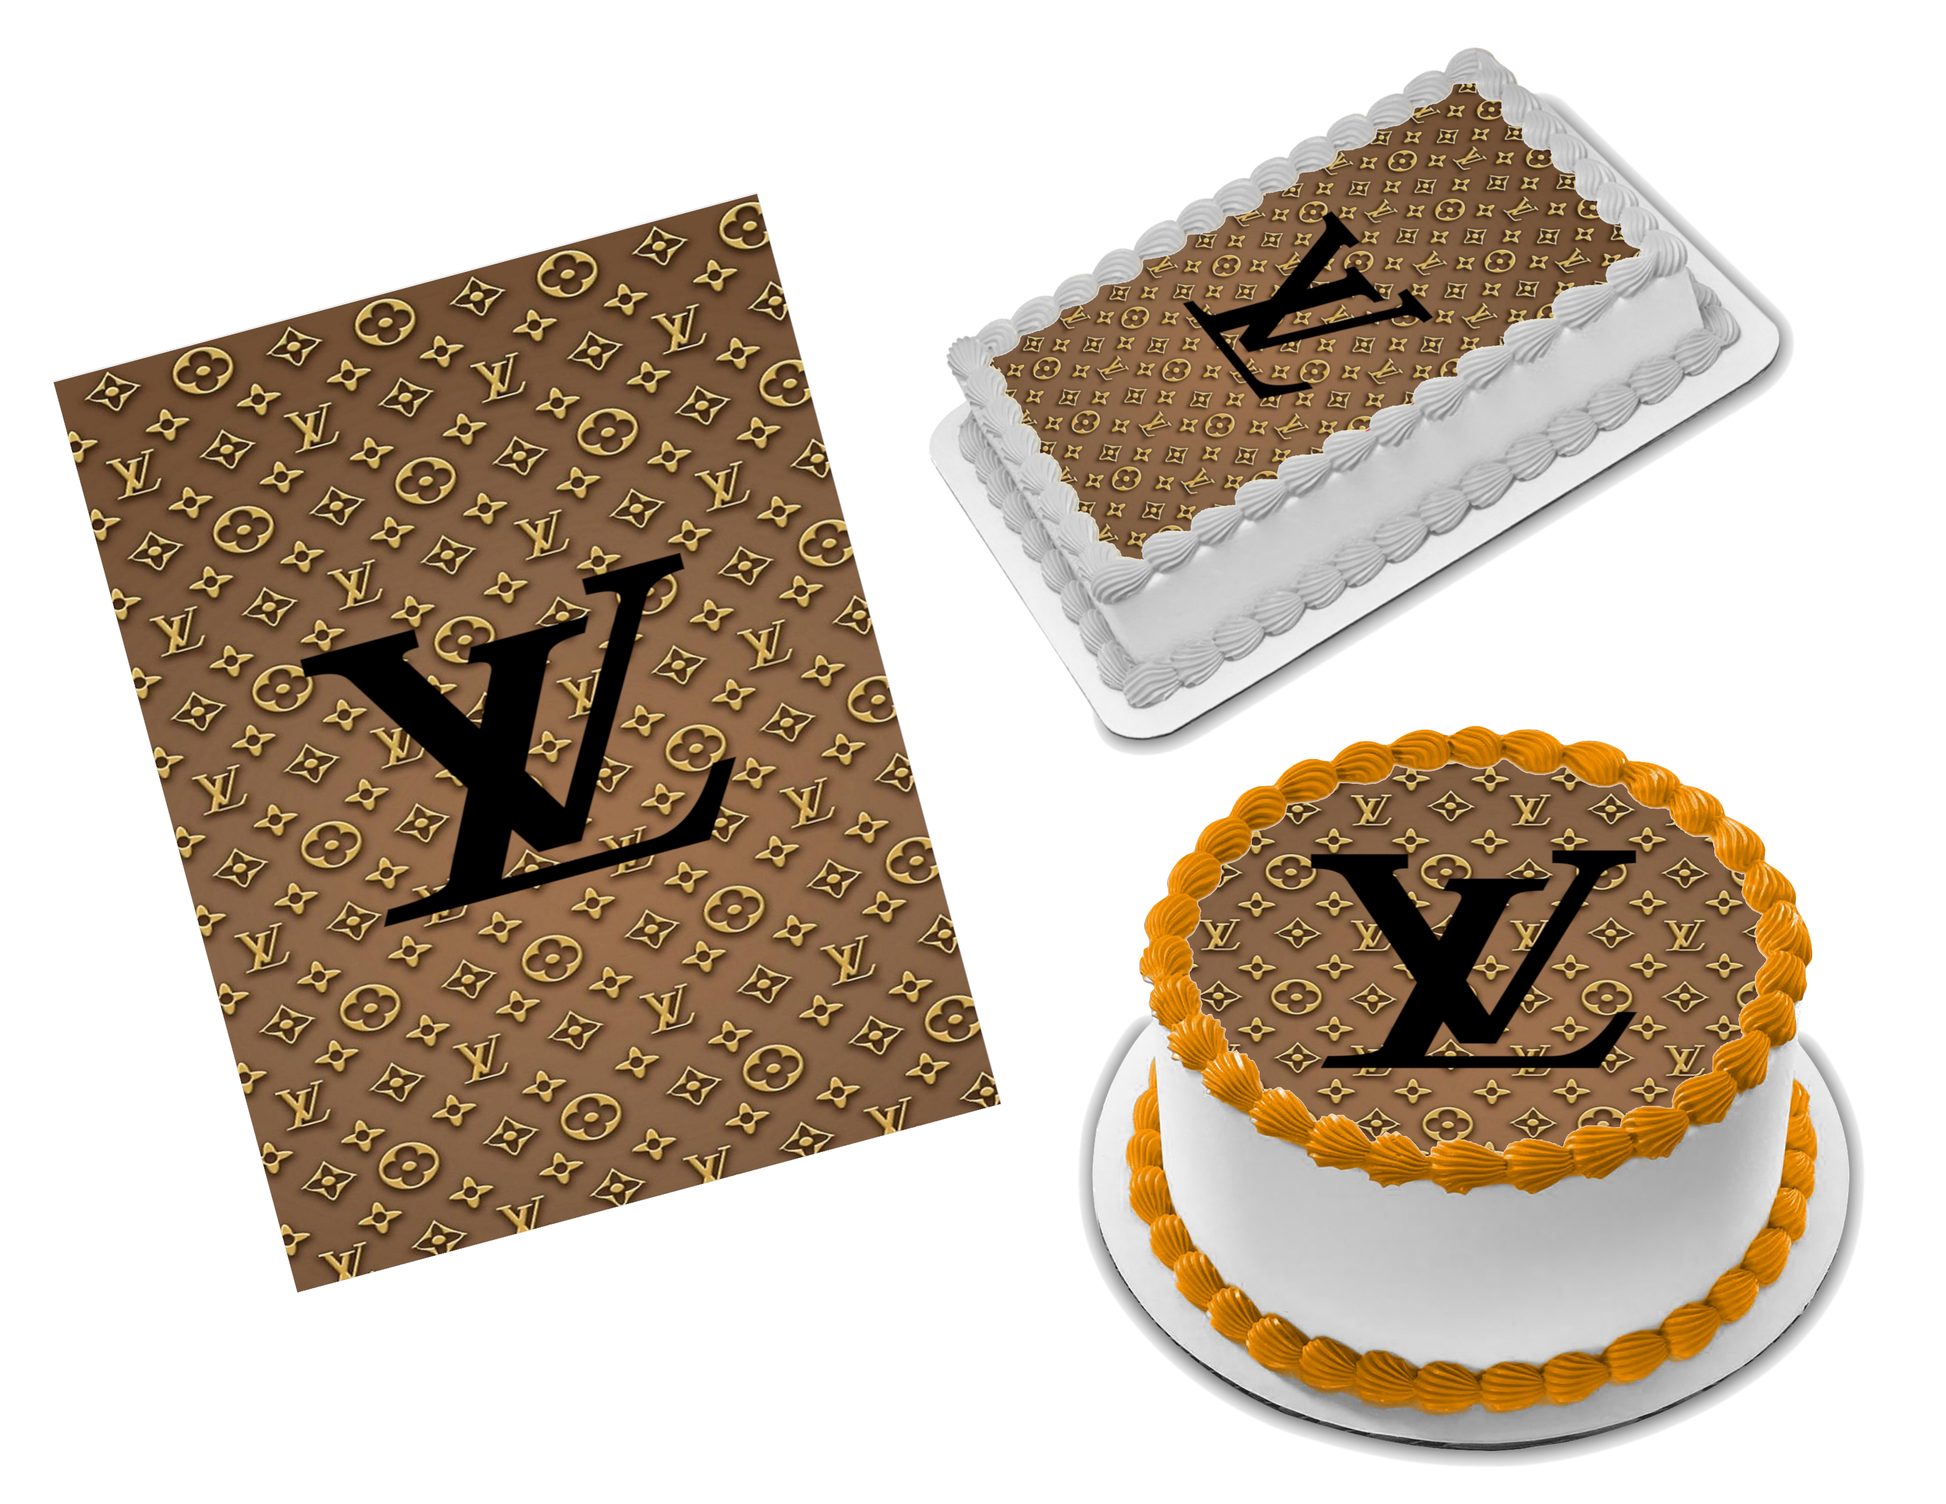 Louis Vuitton, Other, Louis Vuitton Set Of 2 Sheet Of Lv Stickers